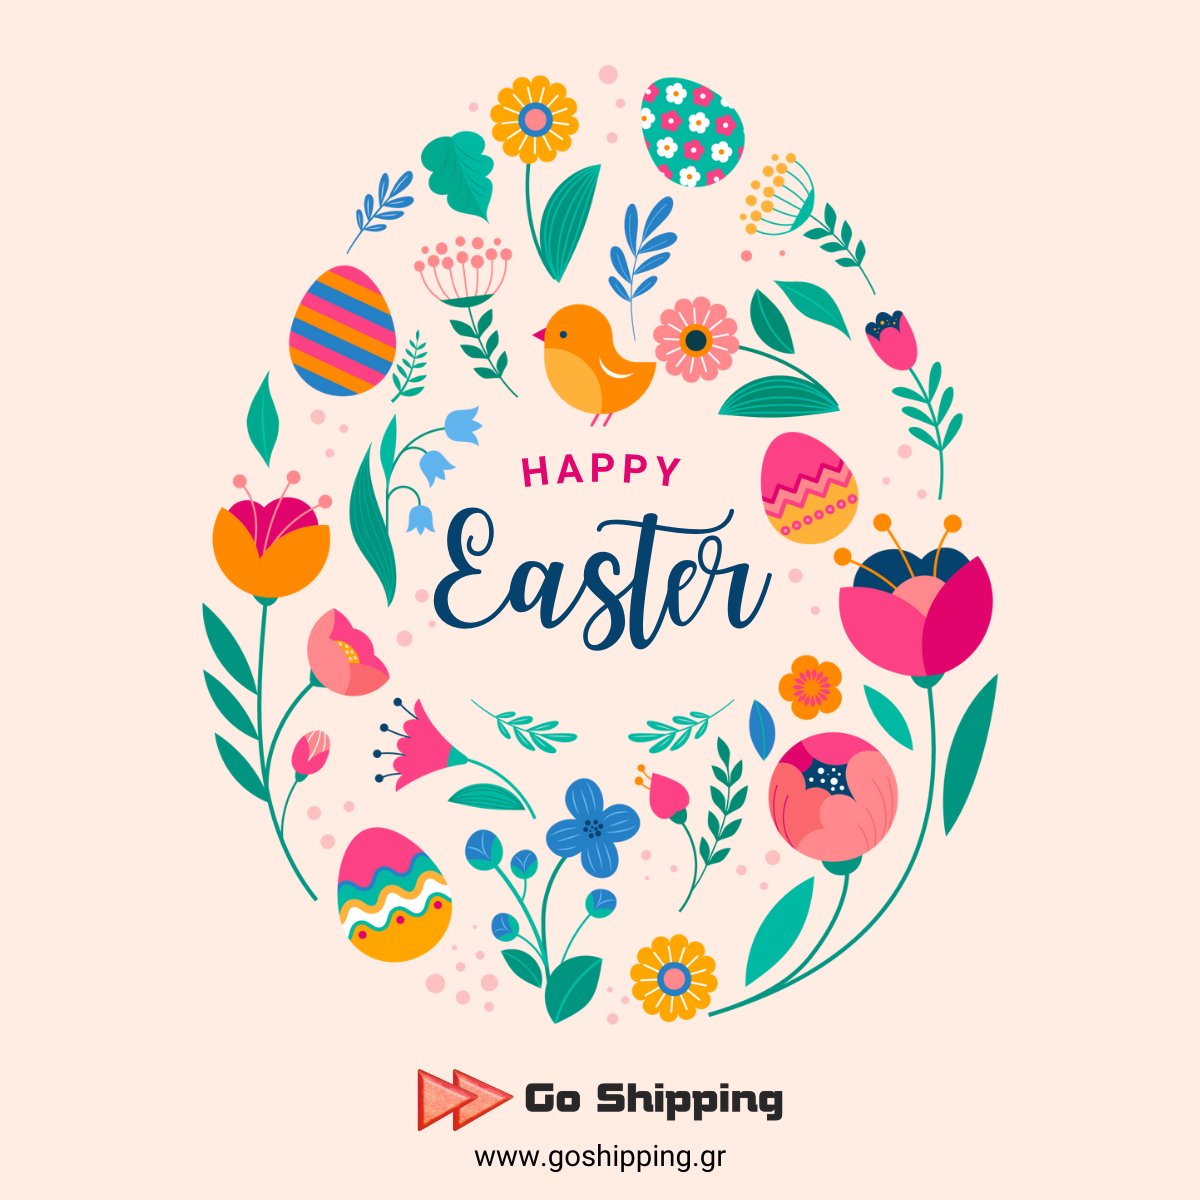 The Go Shipping team wishes you a a joyful Easter 🐣, filled with happy moments!

#Easter #freight #freightservices #GoShipping